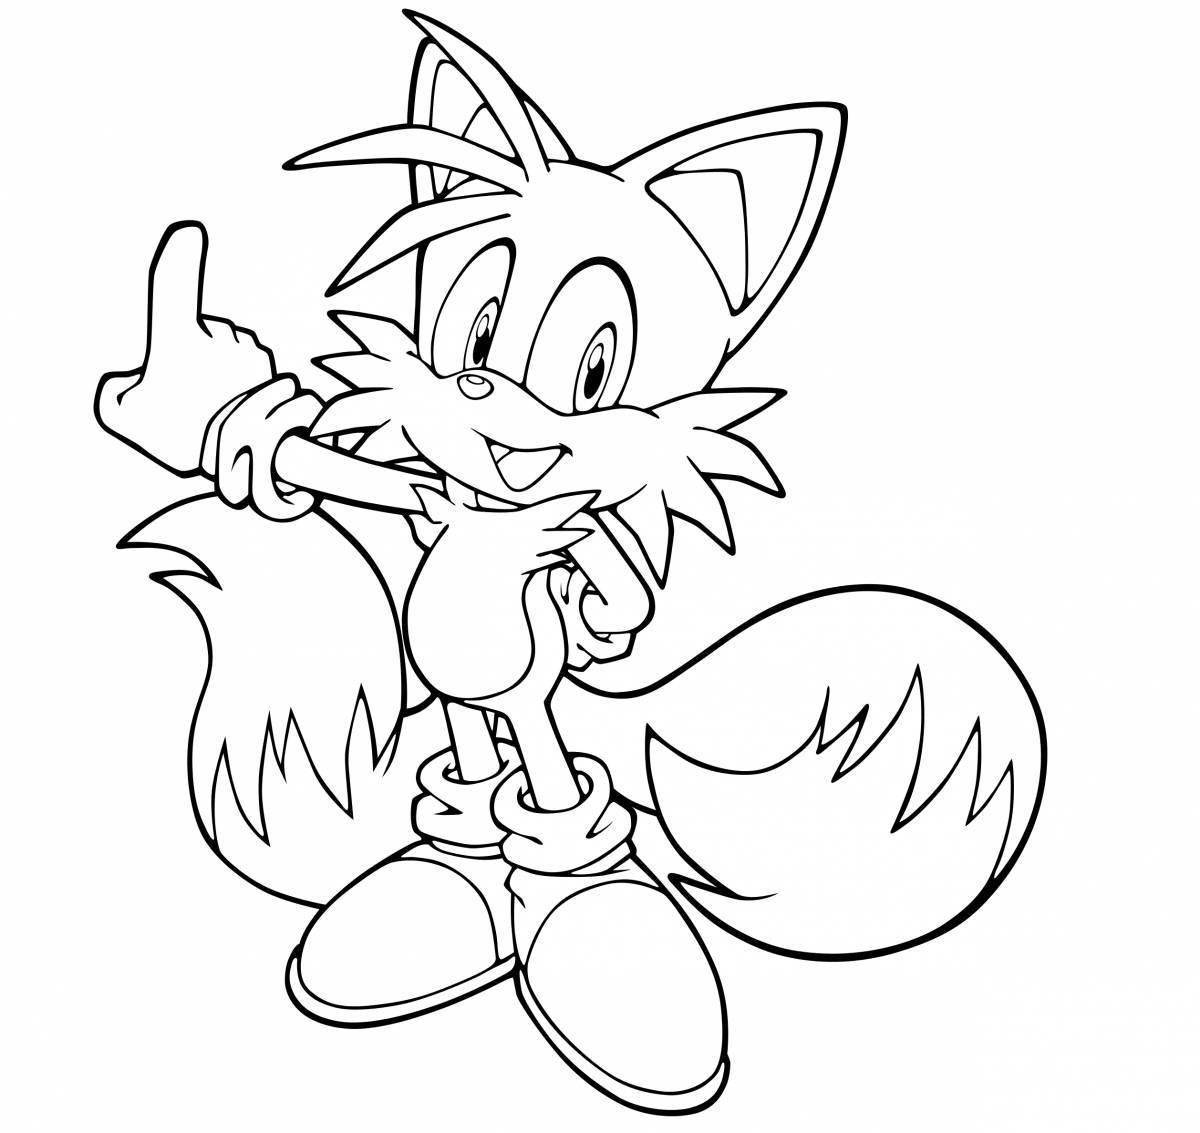 Waving tails coloring page